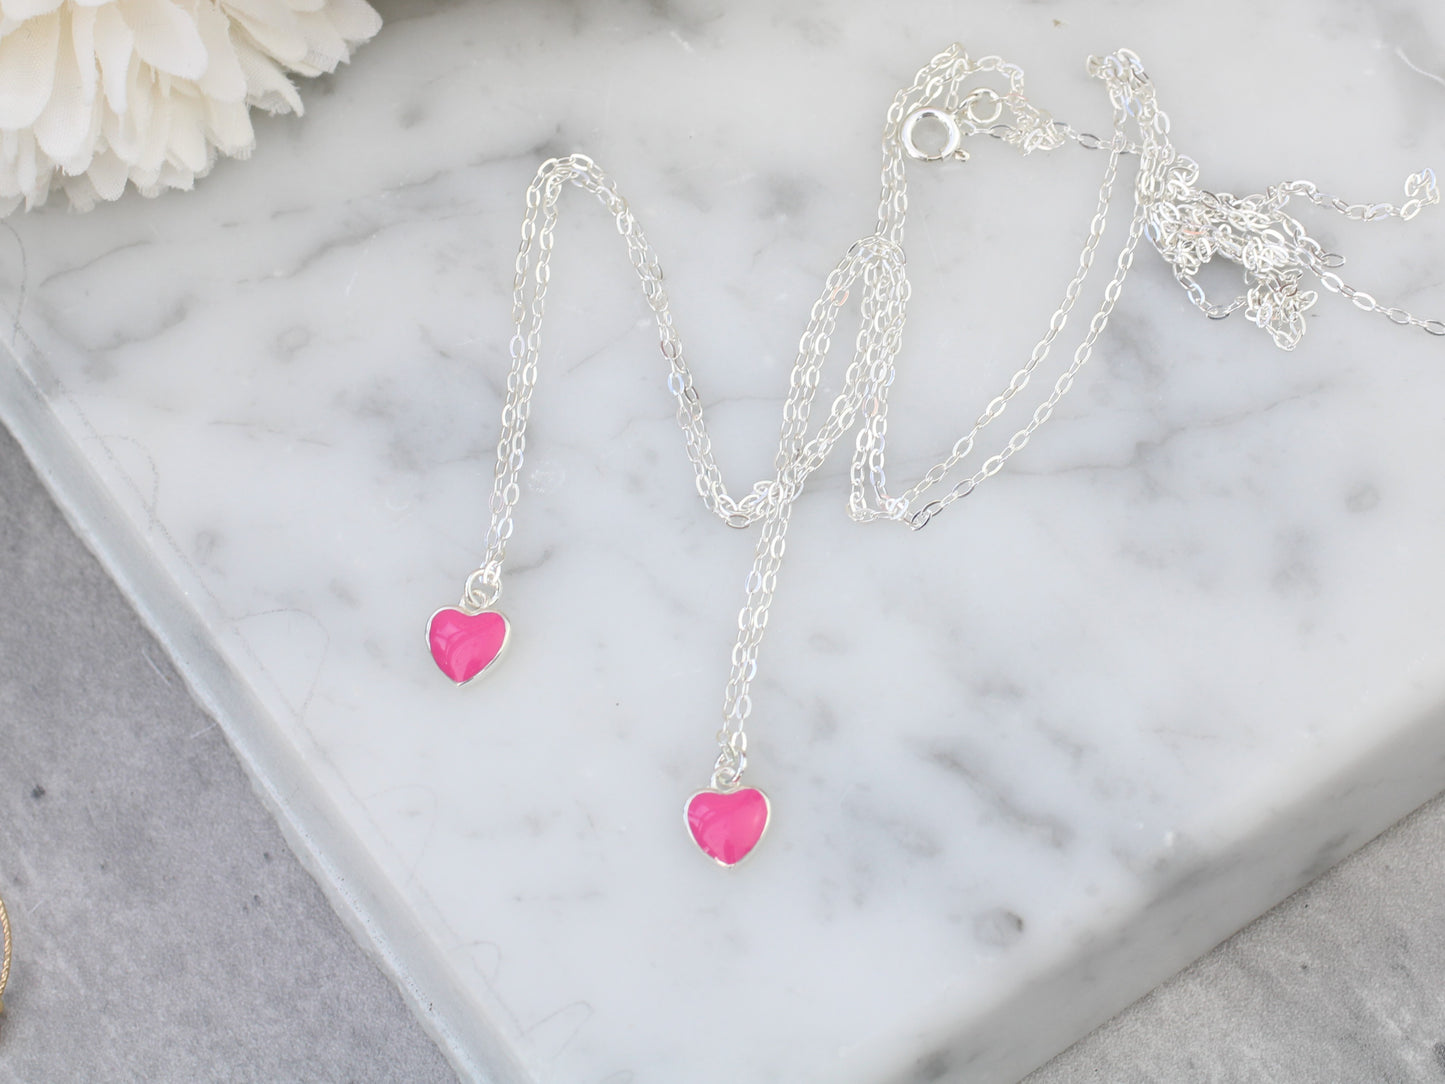 Mother and daughter necklace. Save 10% when you buy 2+.